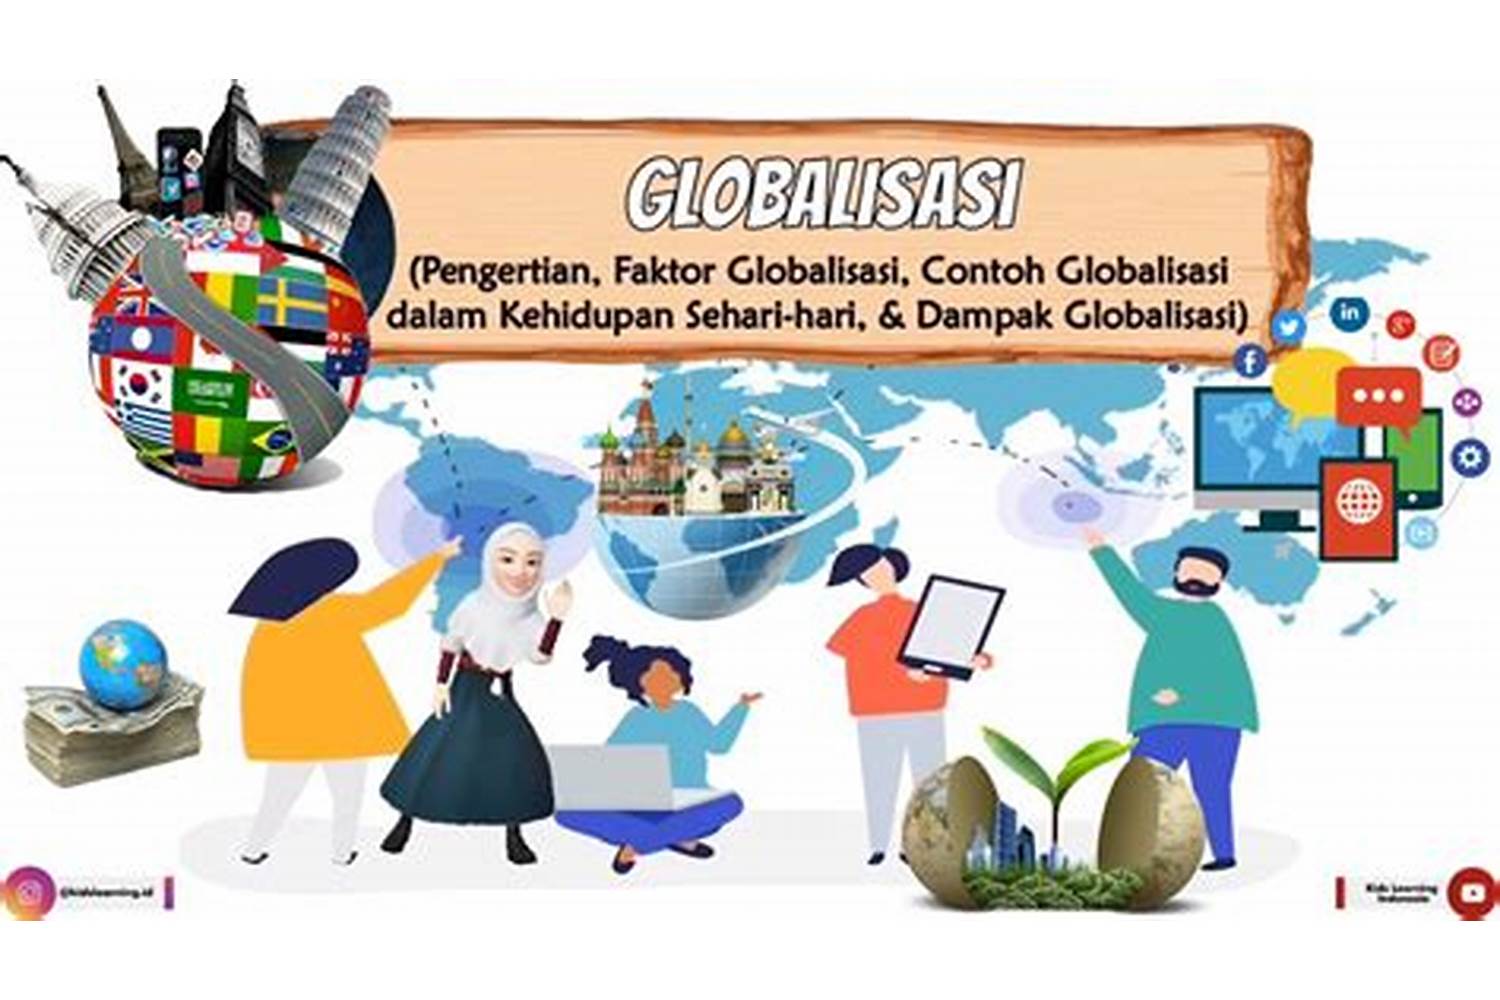 5 False Statements about Globalization in Indonesia